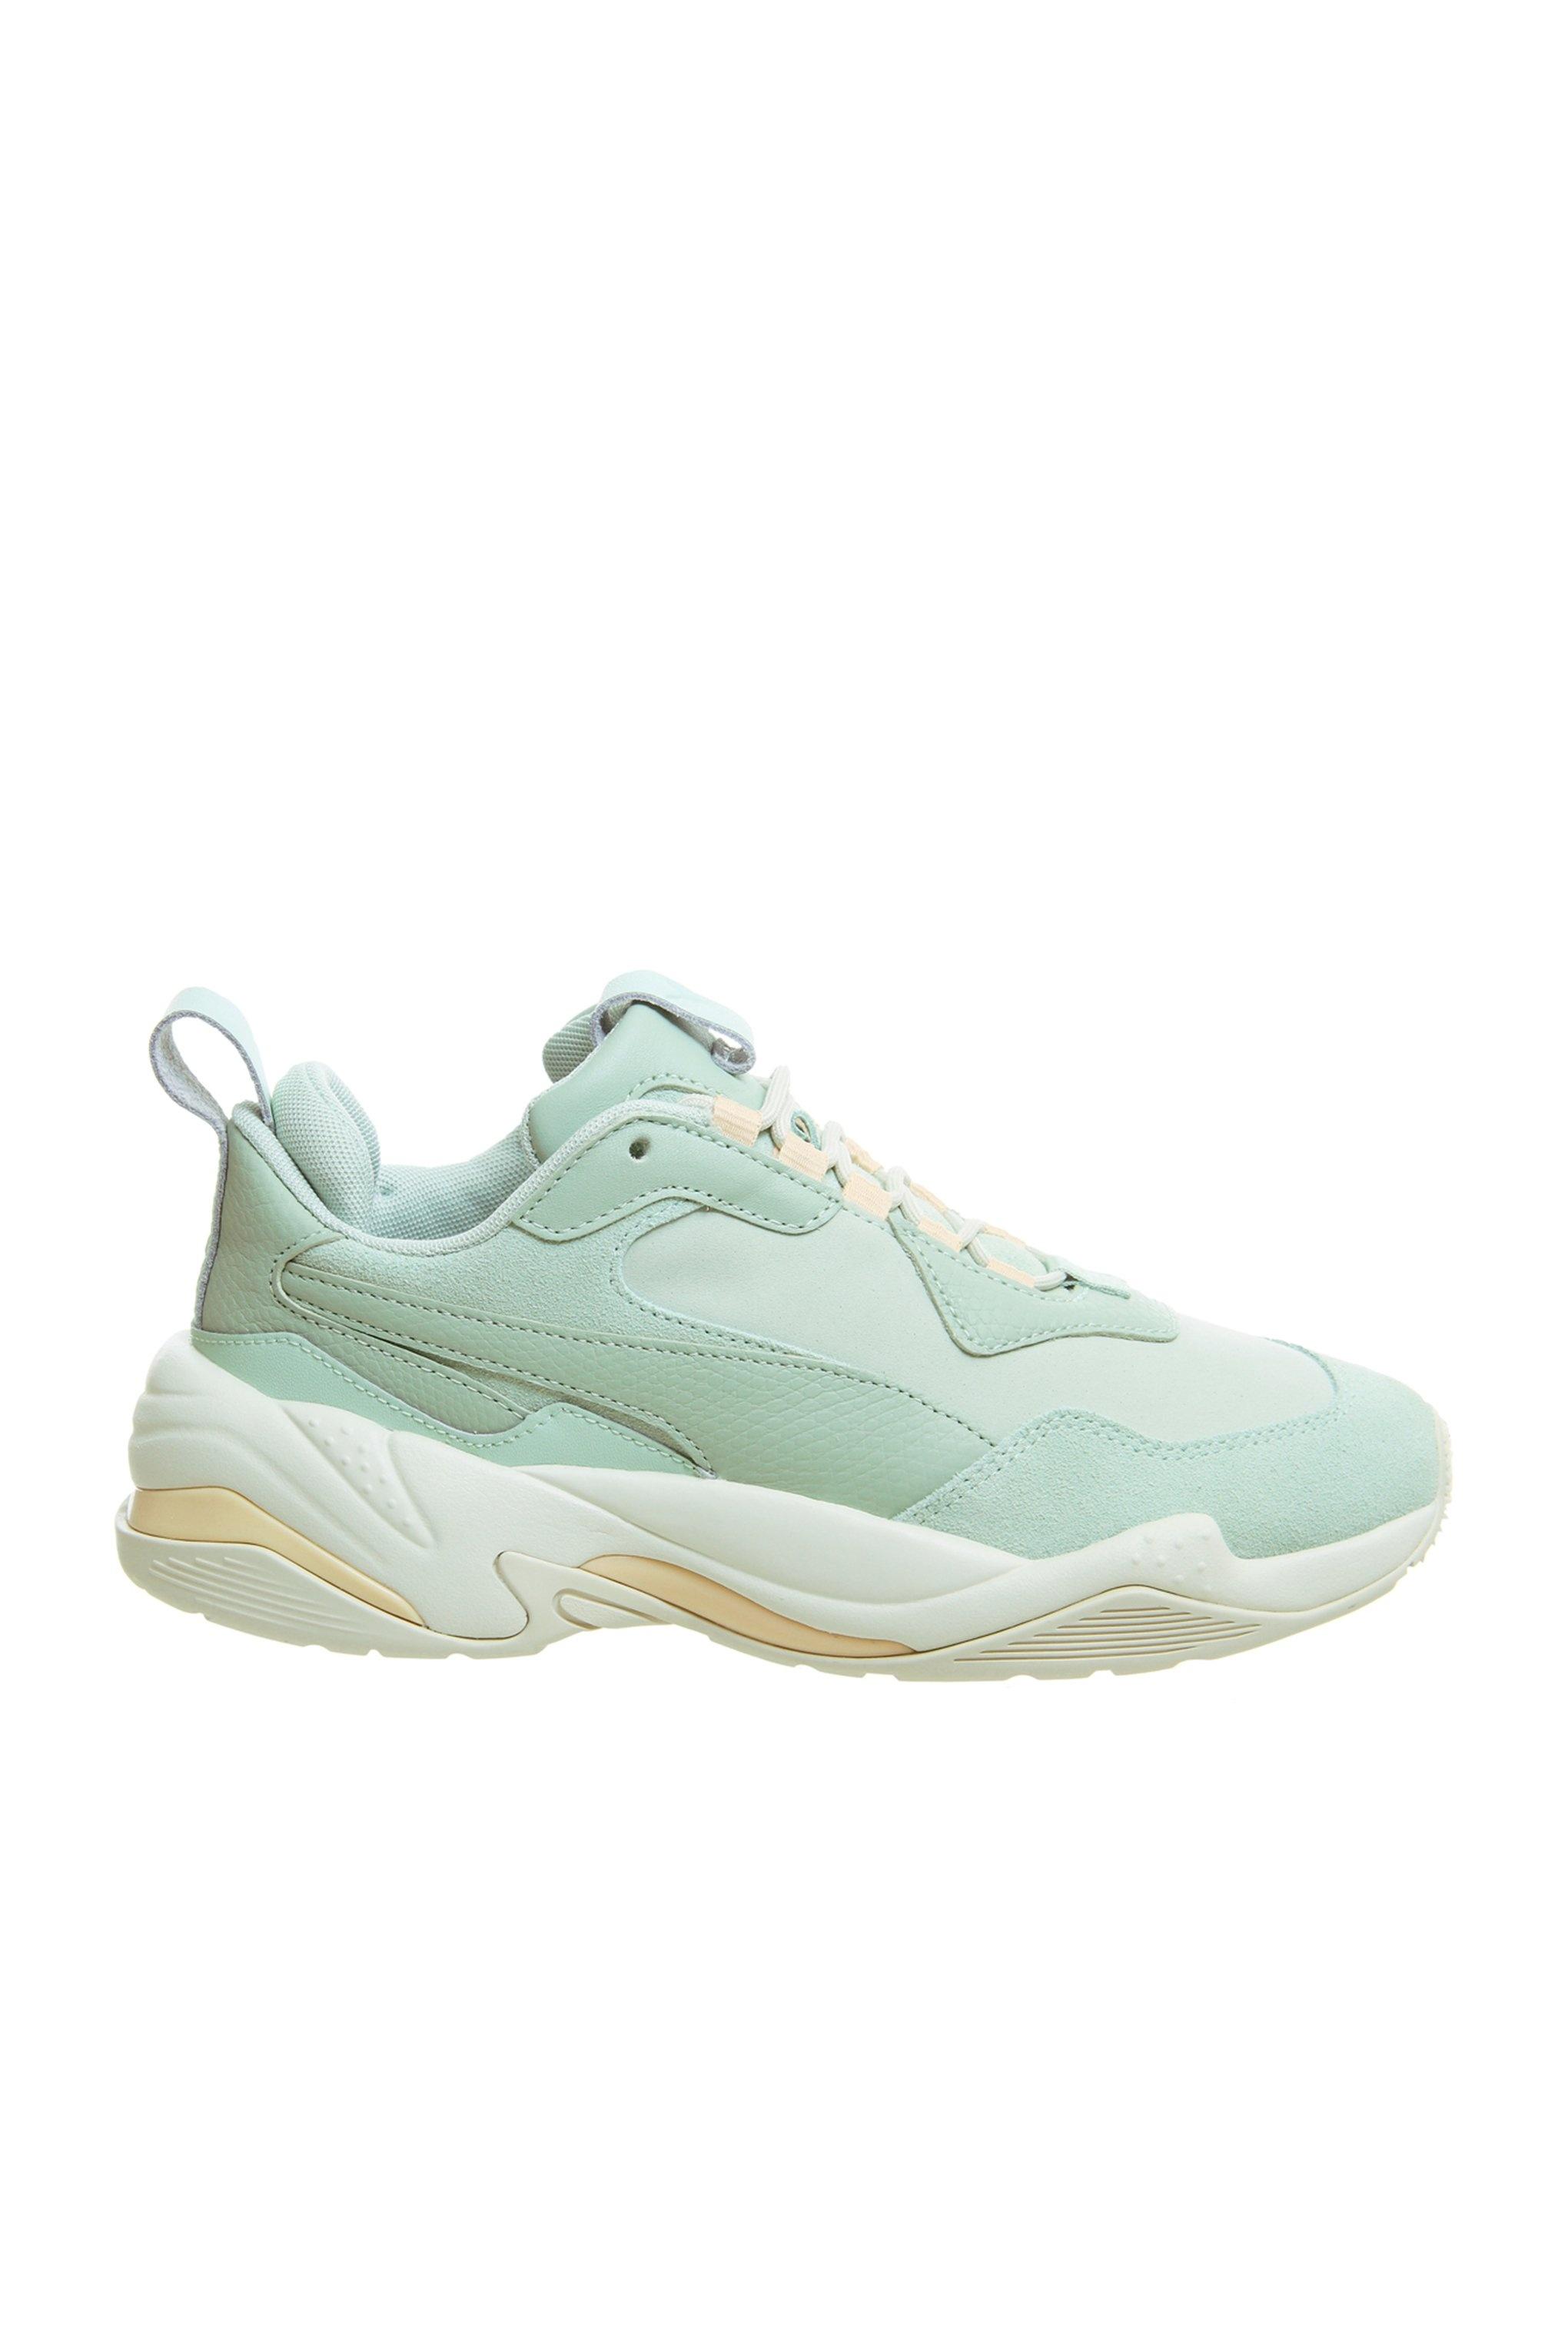 PUMA Leather Thunder Desert Trainers By 